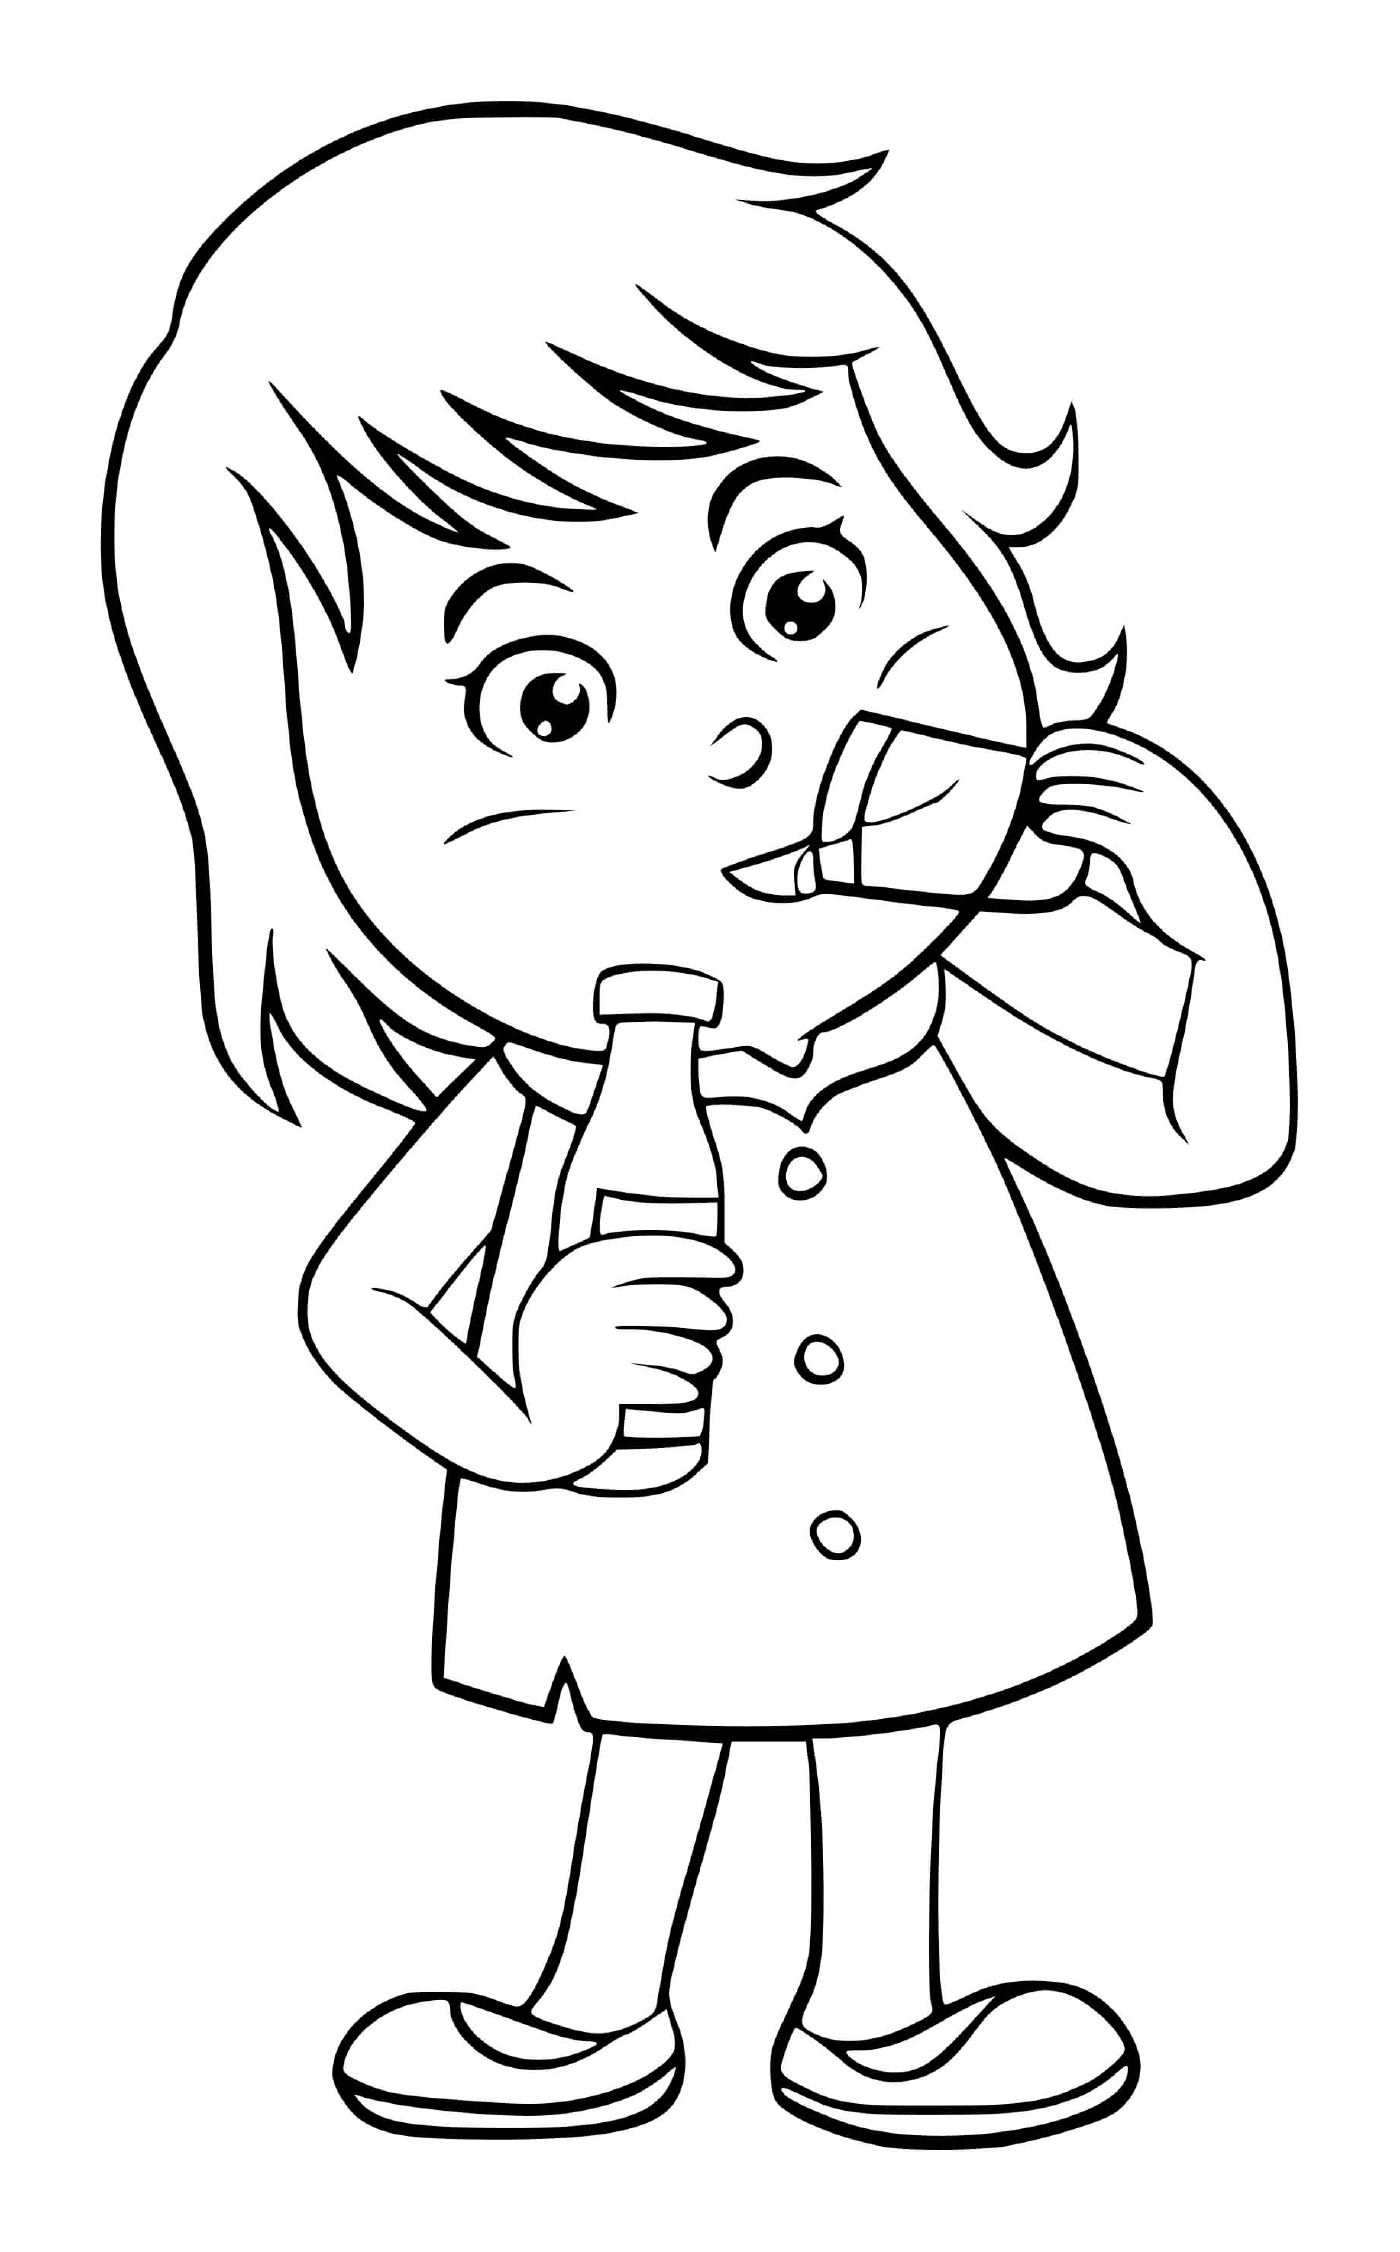  A child drinks water with thirst 